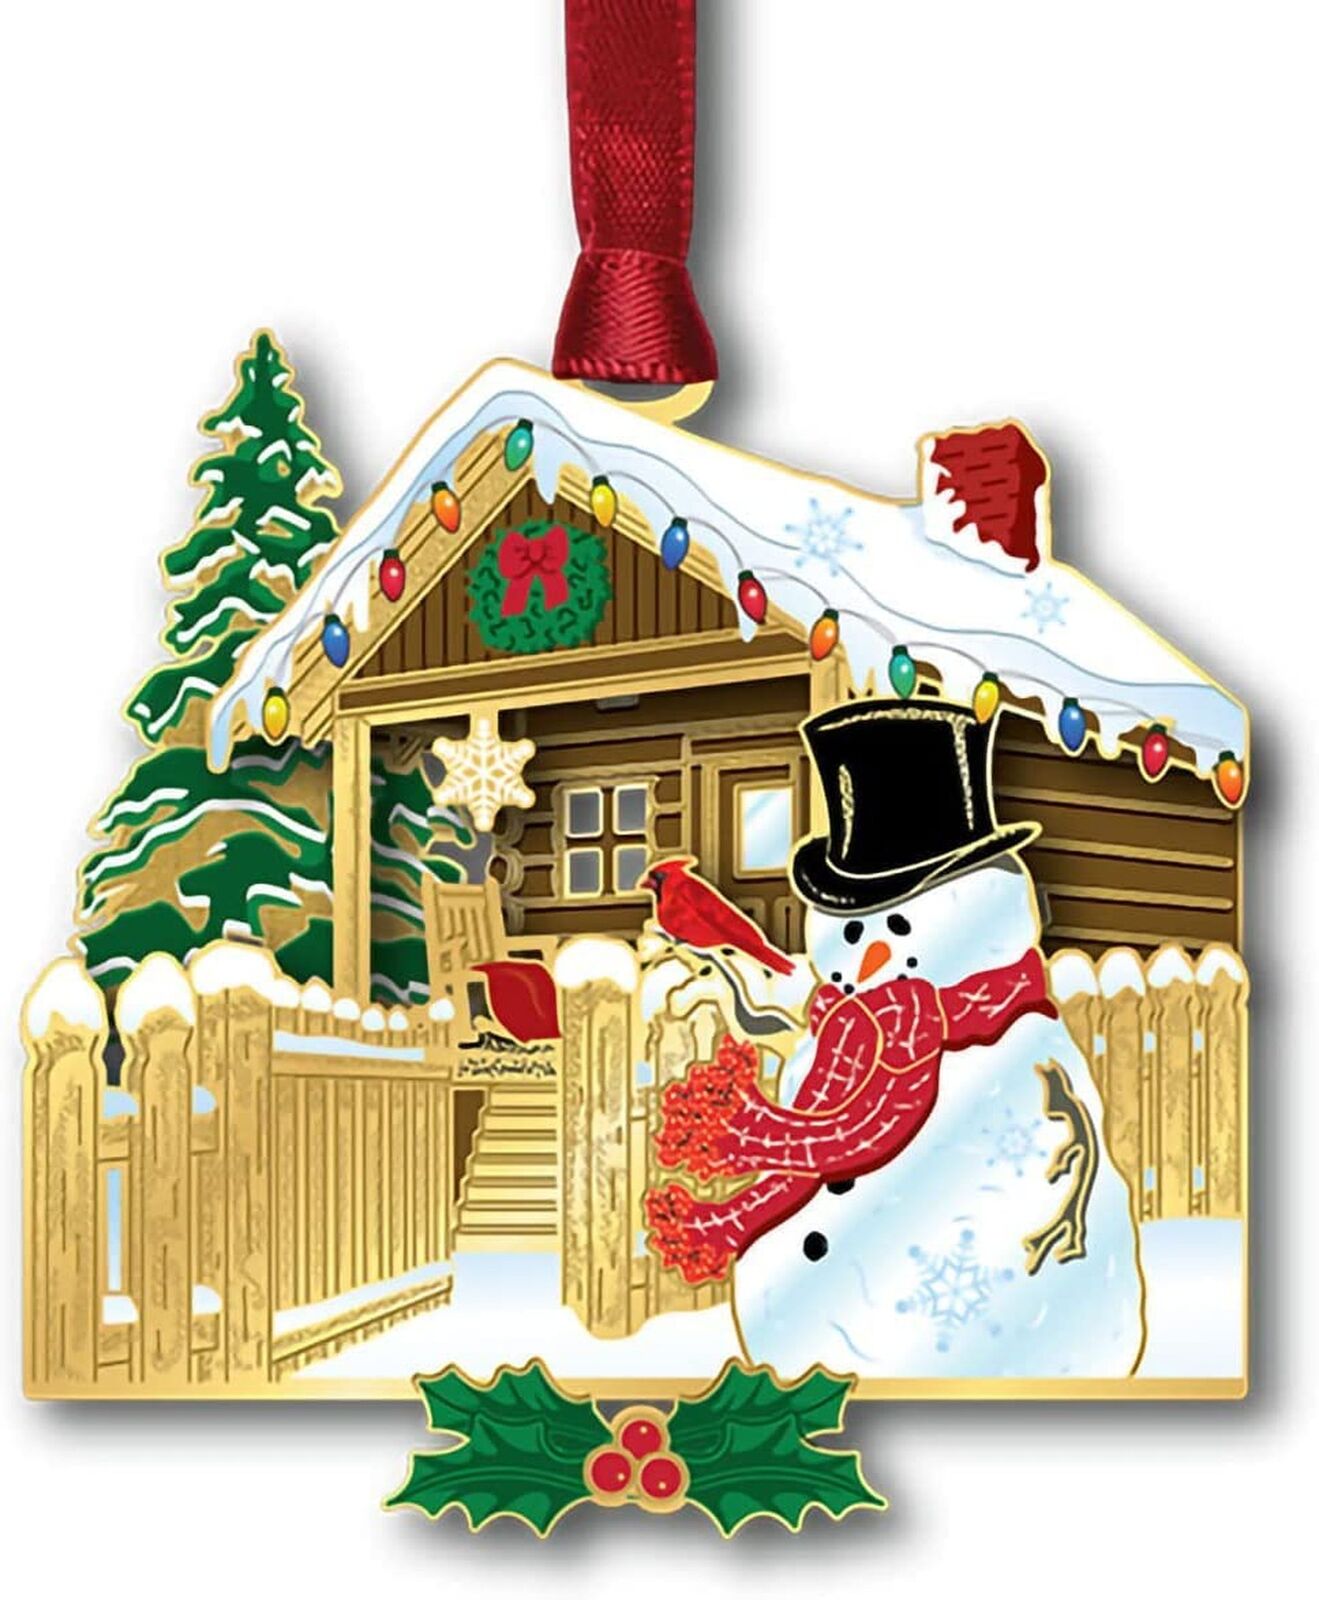 Beacon Design Holiday Log Cabin Ornament with Red Cardinal Snowman, Tree Deco...